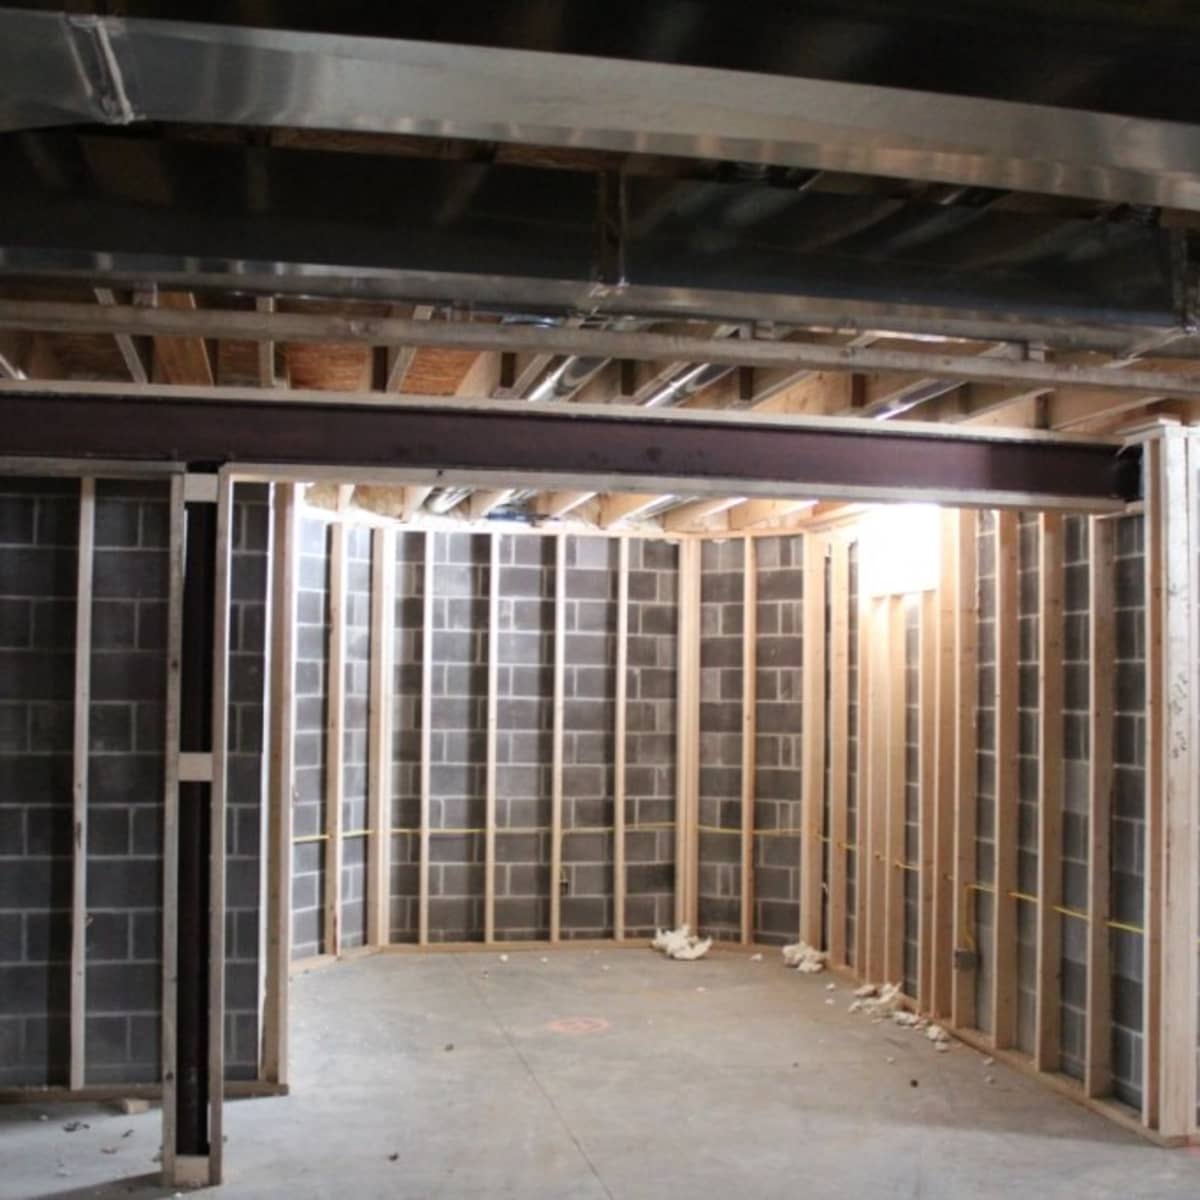 How To Frame And Finish A Basement, How To Layout Basement Walls